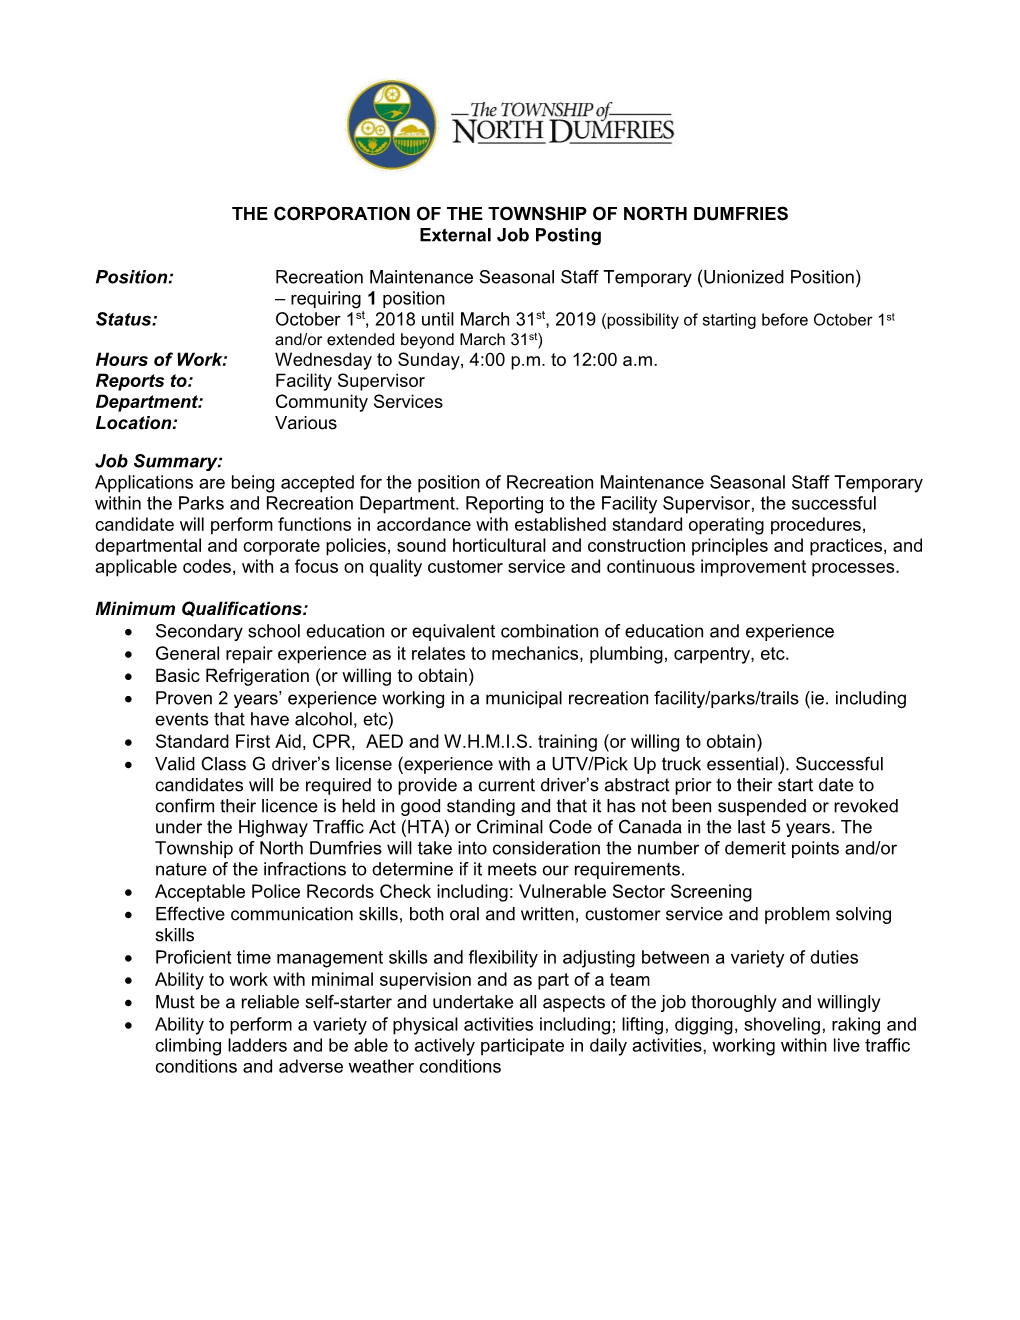 THE CORPORATION of the TOWNSHIP of NORTH DUMFRIES External Job Posting